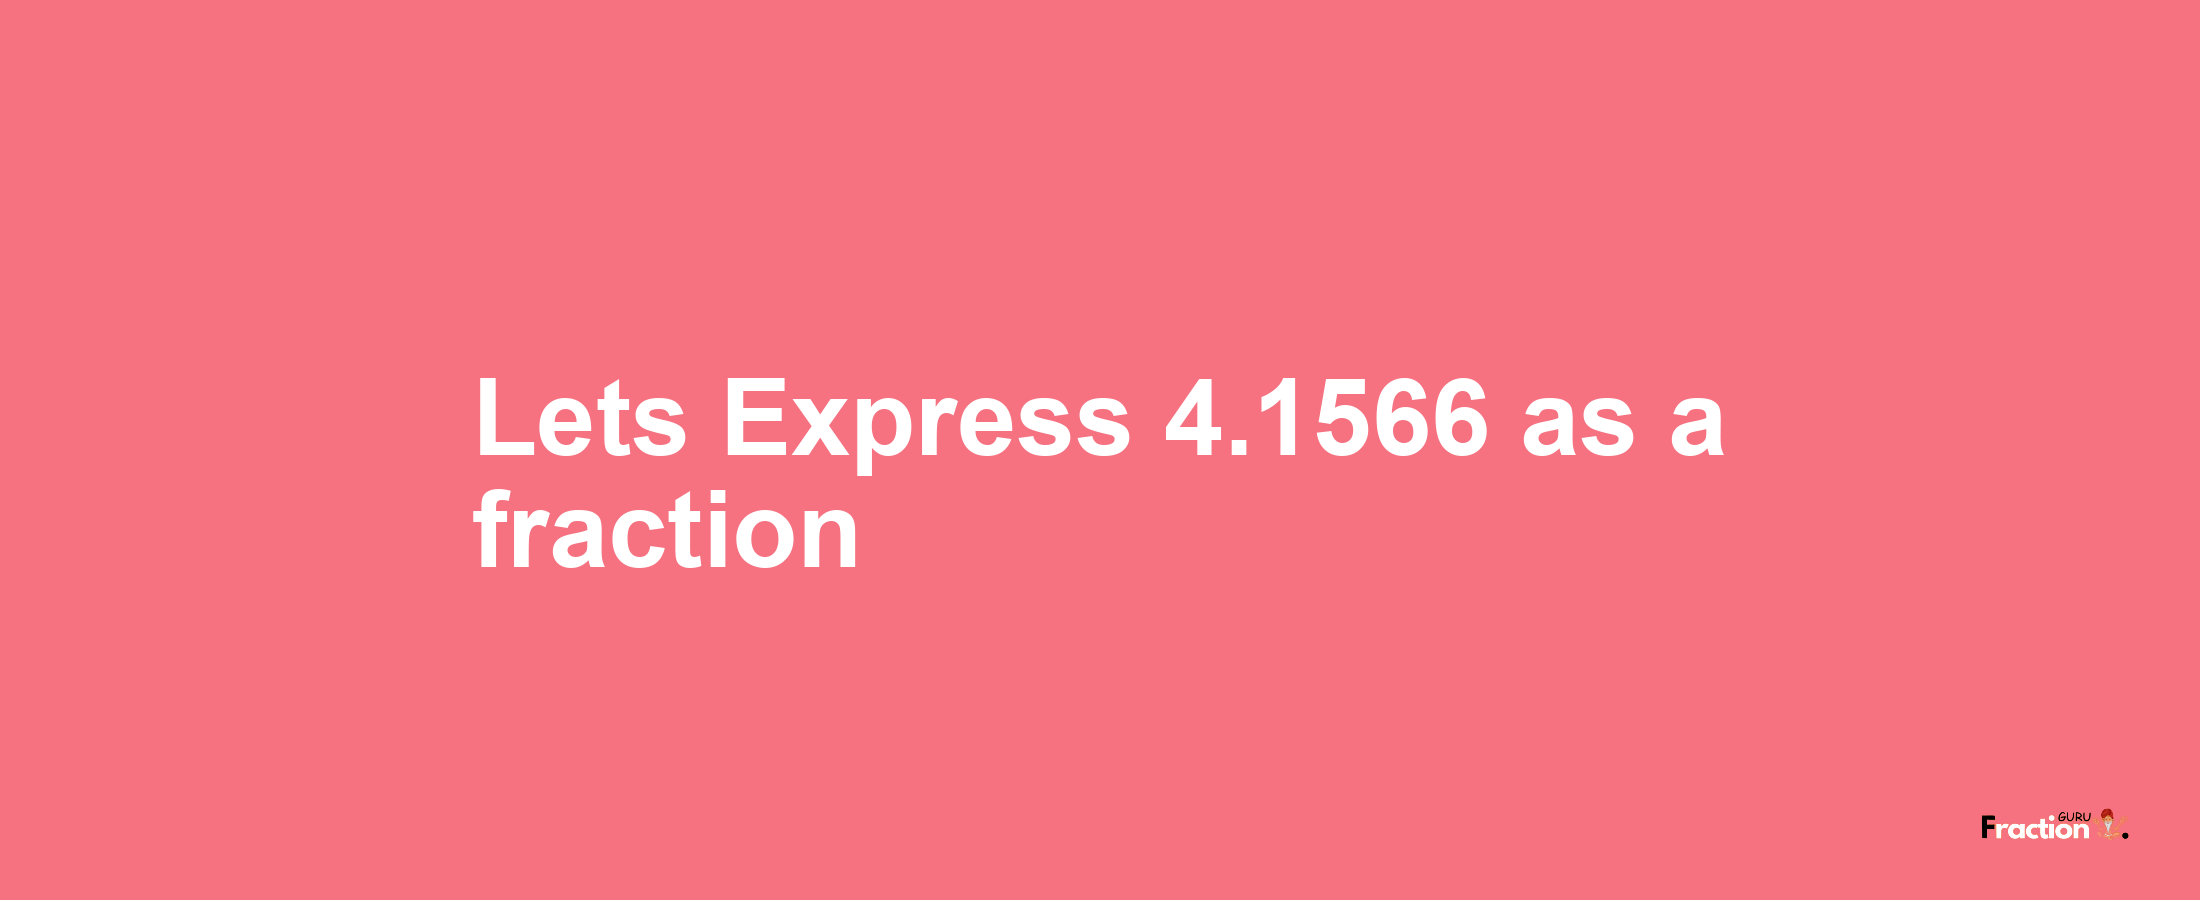 Lets Express 4.1566 as afraction